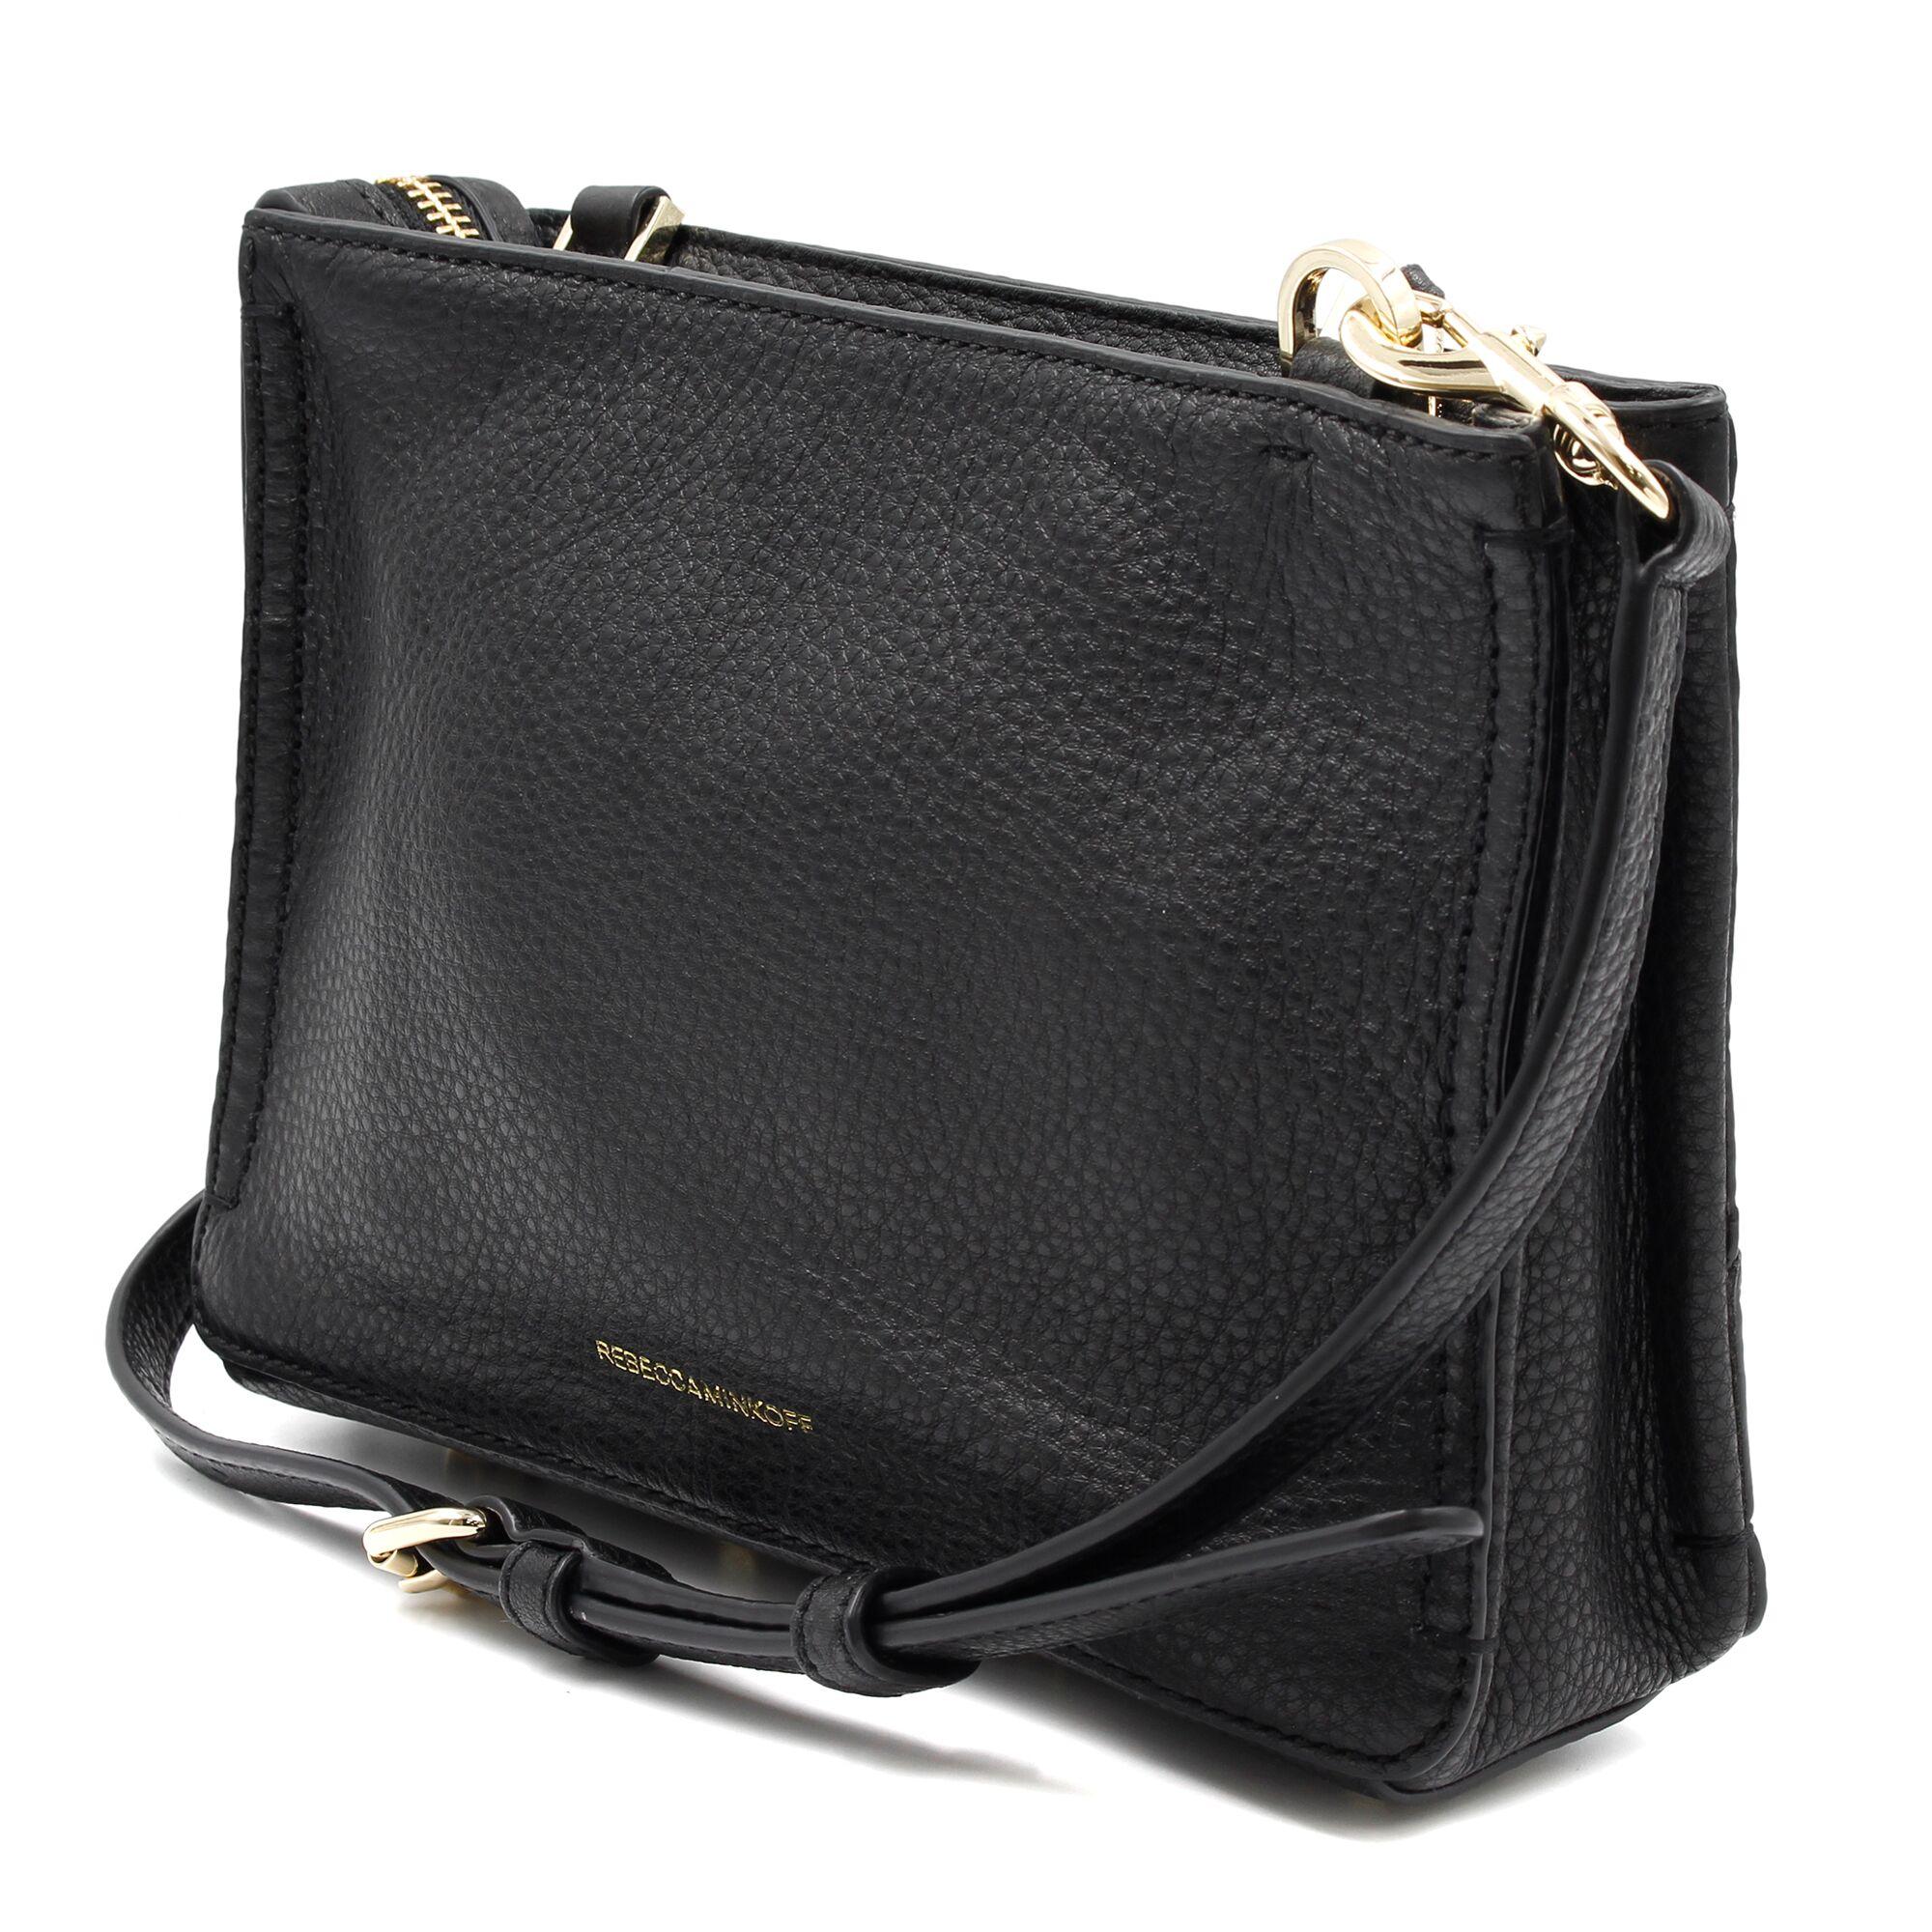 Brand: Rebecca Minkoff.
Model Number: HS16IPBX68
Color: Black.
Material: Leather.
Lining: Lined.
Style: Cross-body.
Dimensions: H: 6 inch x D: 2.5 inch x L: 9 inch.